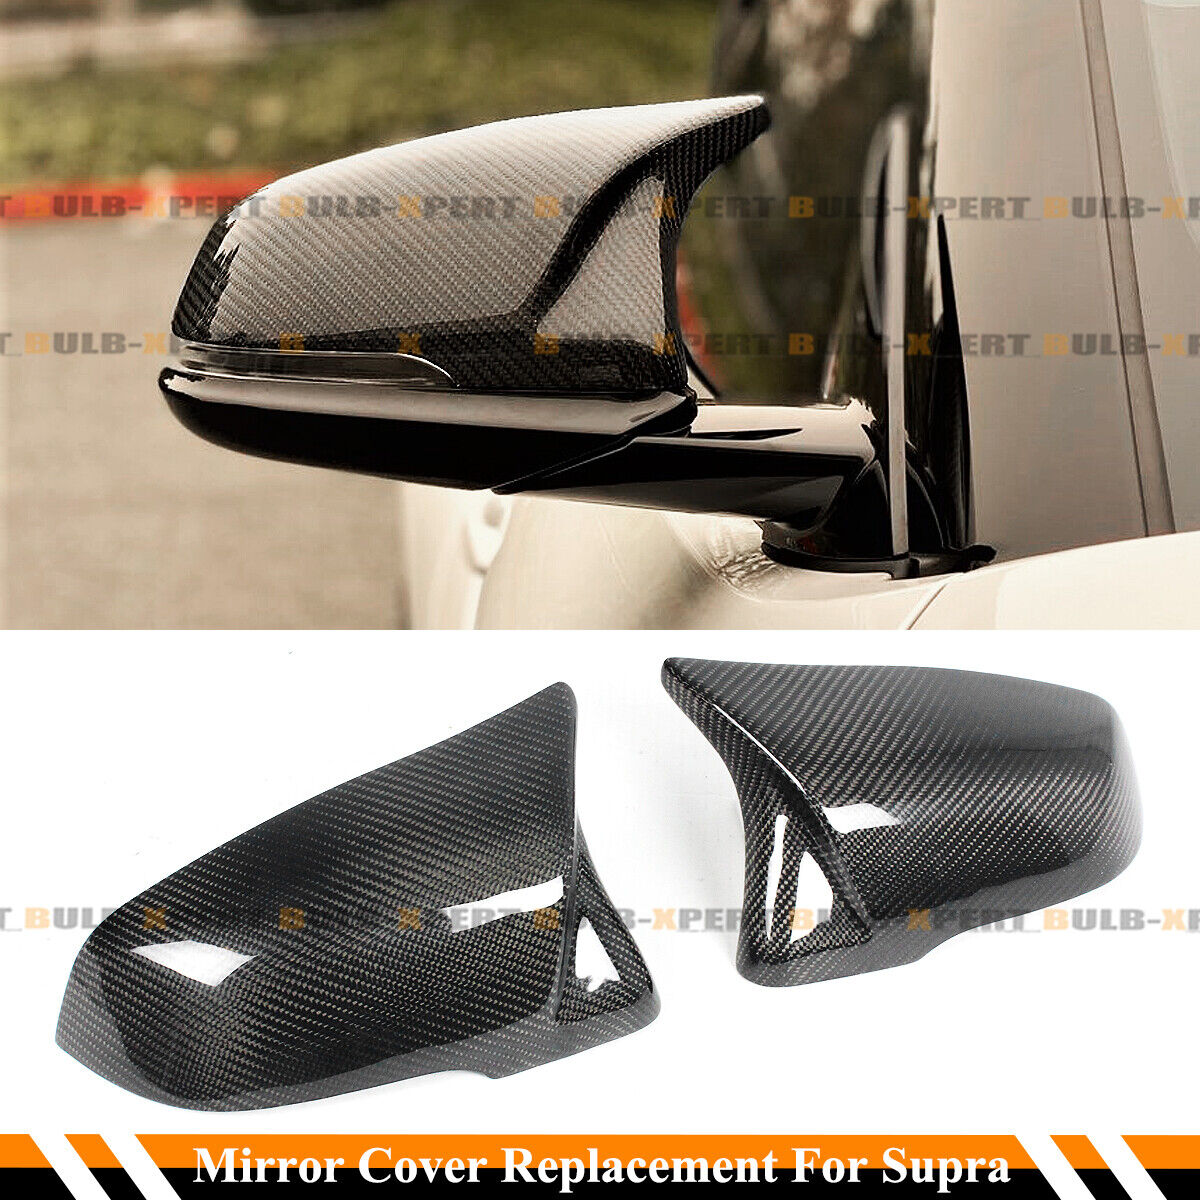 FOR 2020-23 TOYOTA SUPRA A90 M STYLE CARBON FIBER REPLACEMENT MIRROR COVERS CAPS